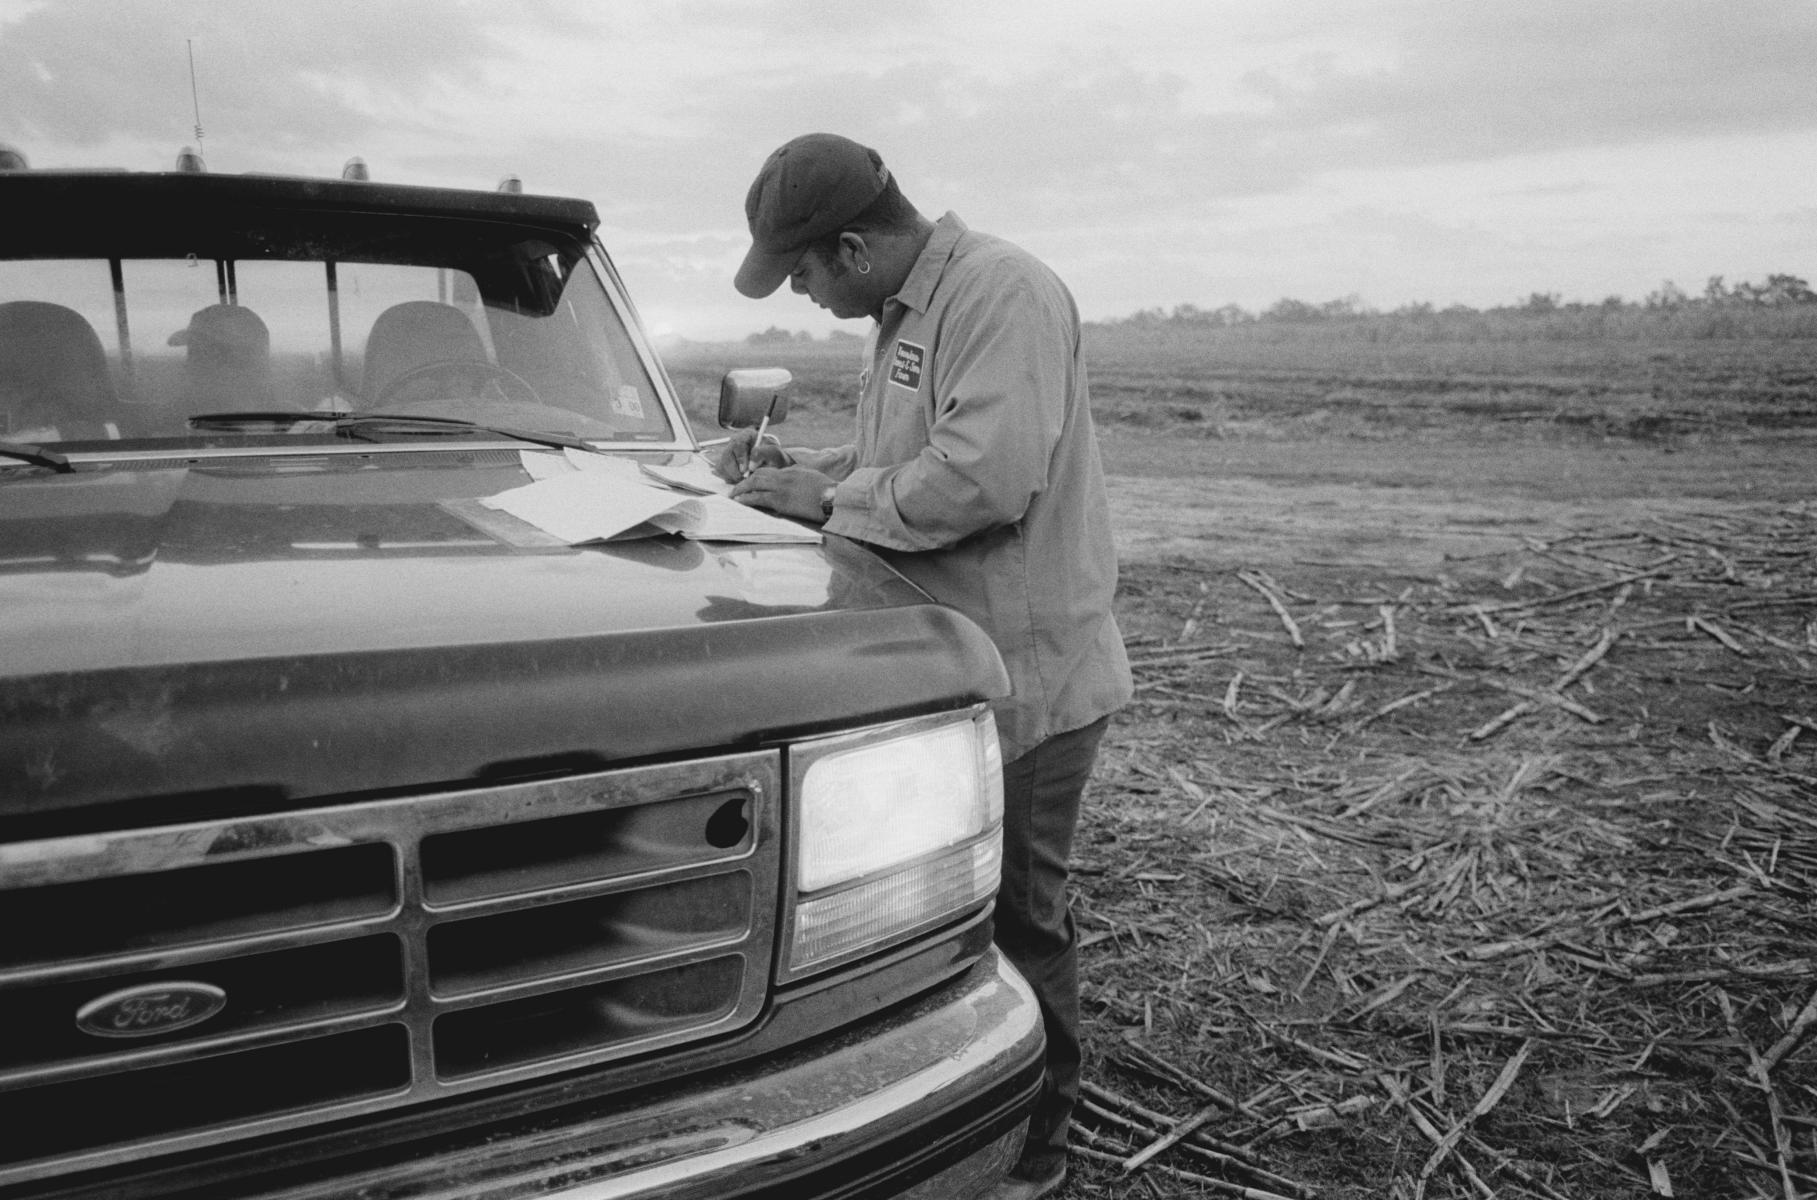 <p><center>Iberia Parish, Louisiana:</center></p>
June,  the youngest Provost brother, fills out the required paperwork that will accompany their trucks of sugarcane to the mill for testing of sugar content and weight. : Images : AMERICAN BLACK FARMERS PROJECT - John Ficara